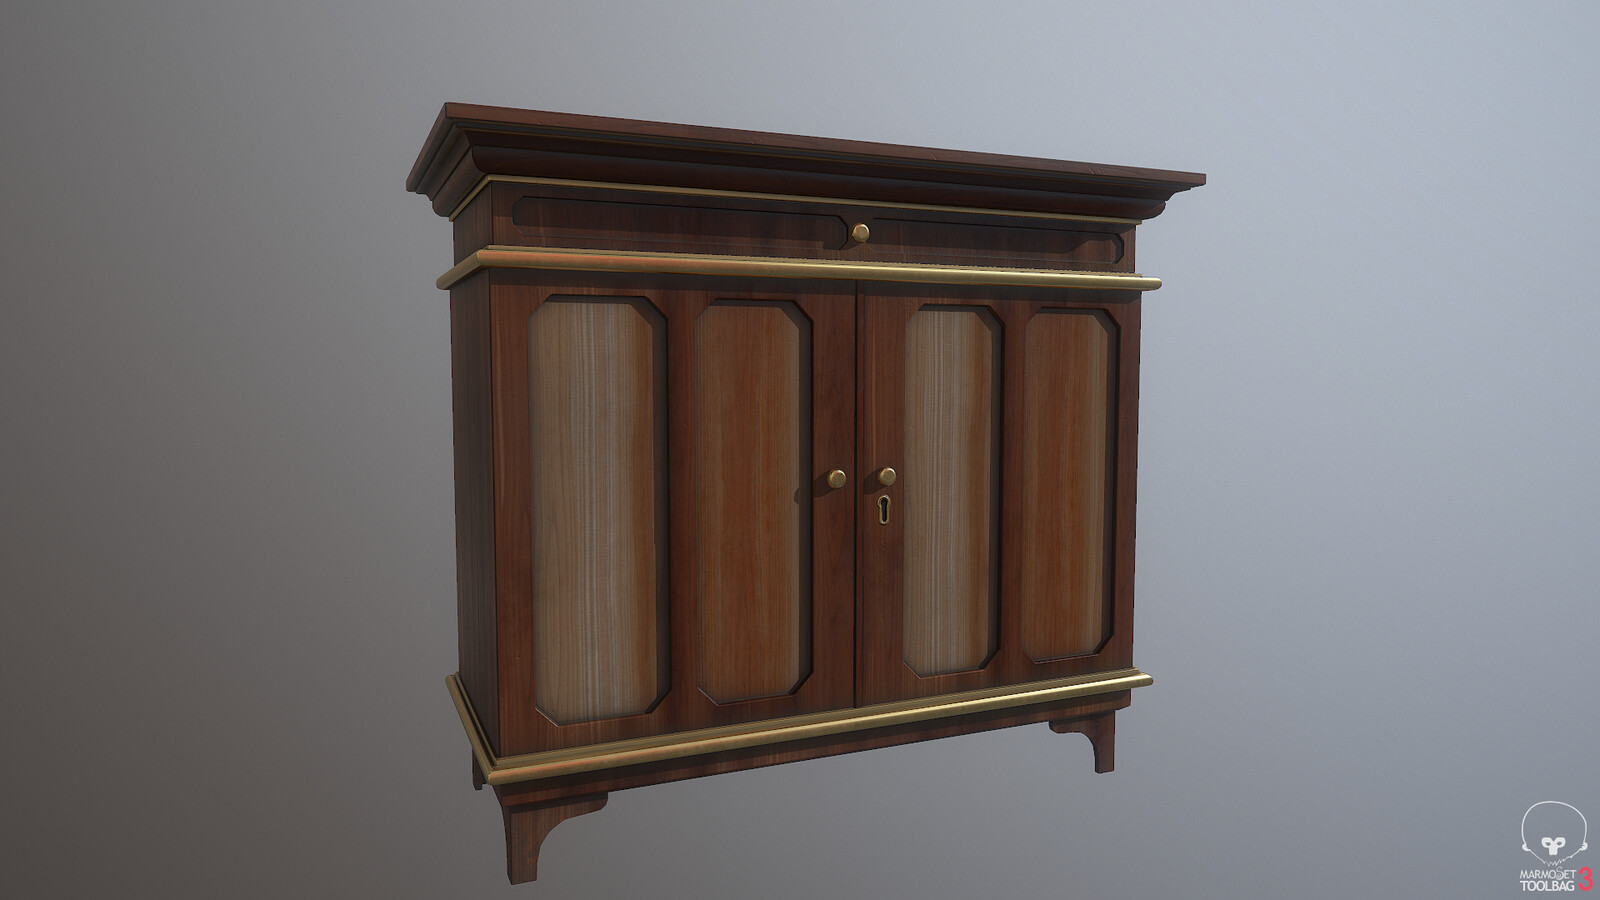 Cabinet, modeled in Max, textured in Substance.